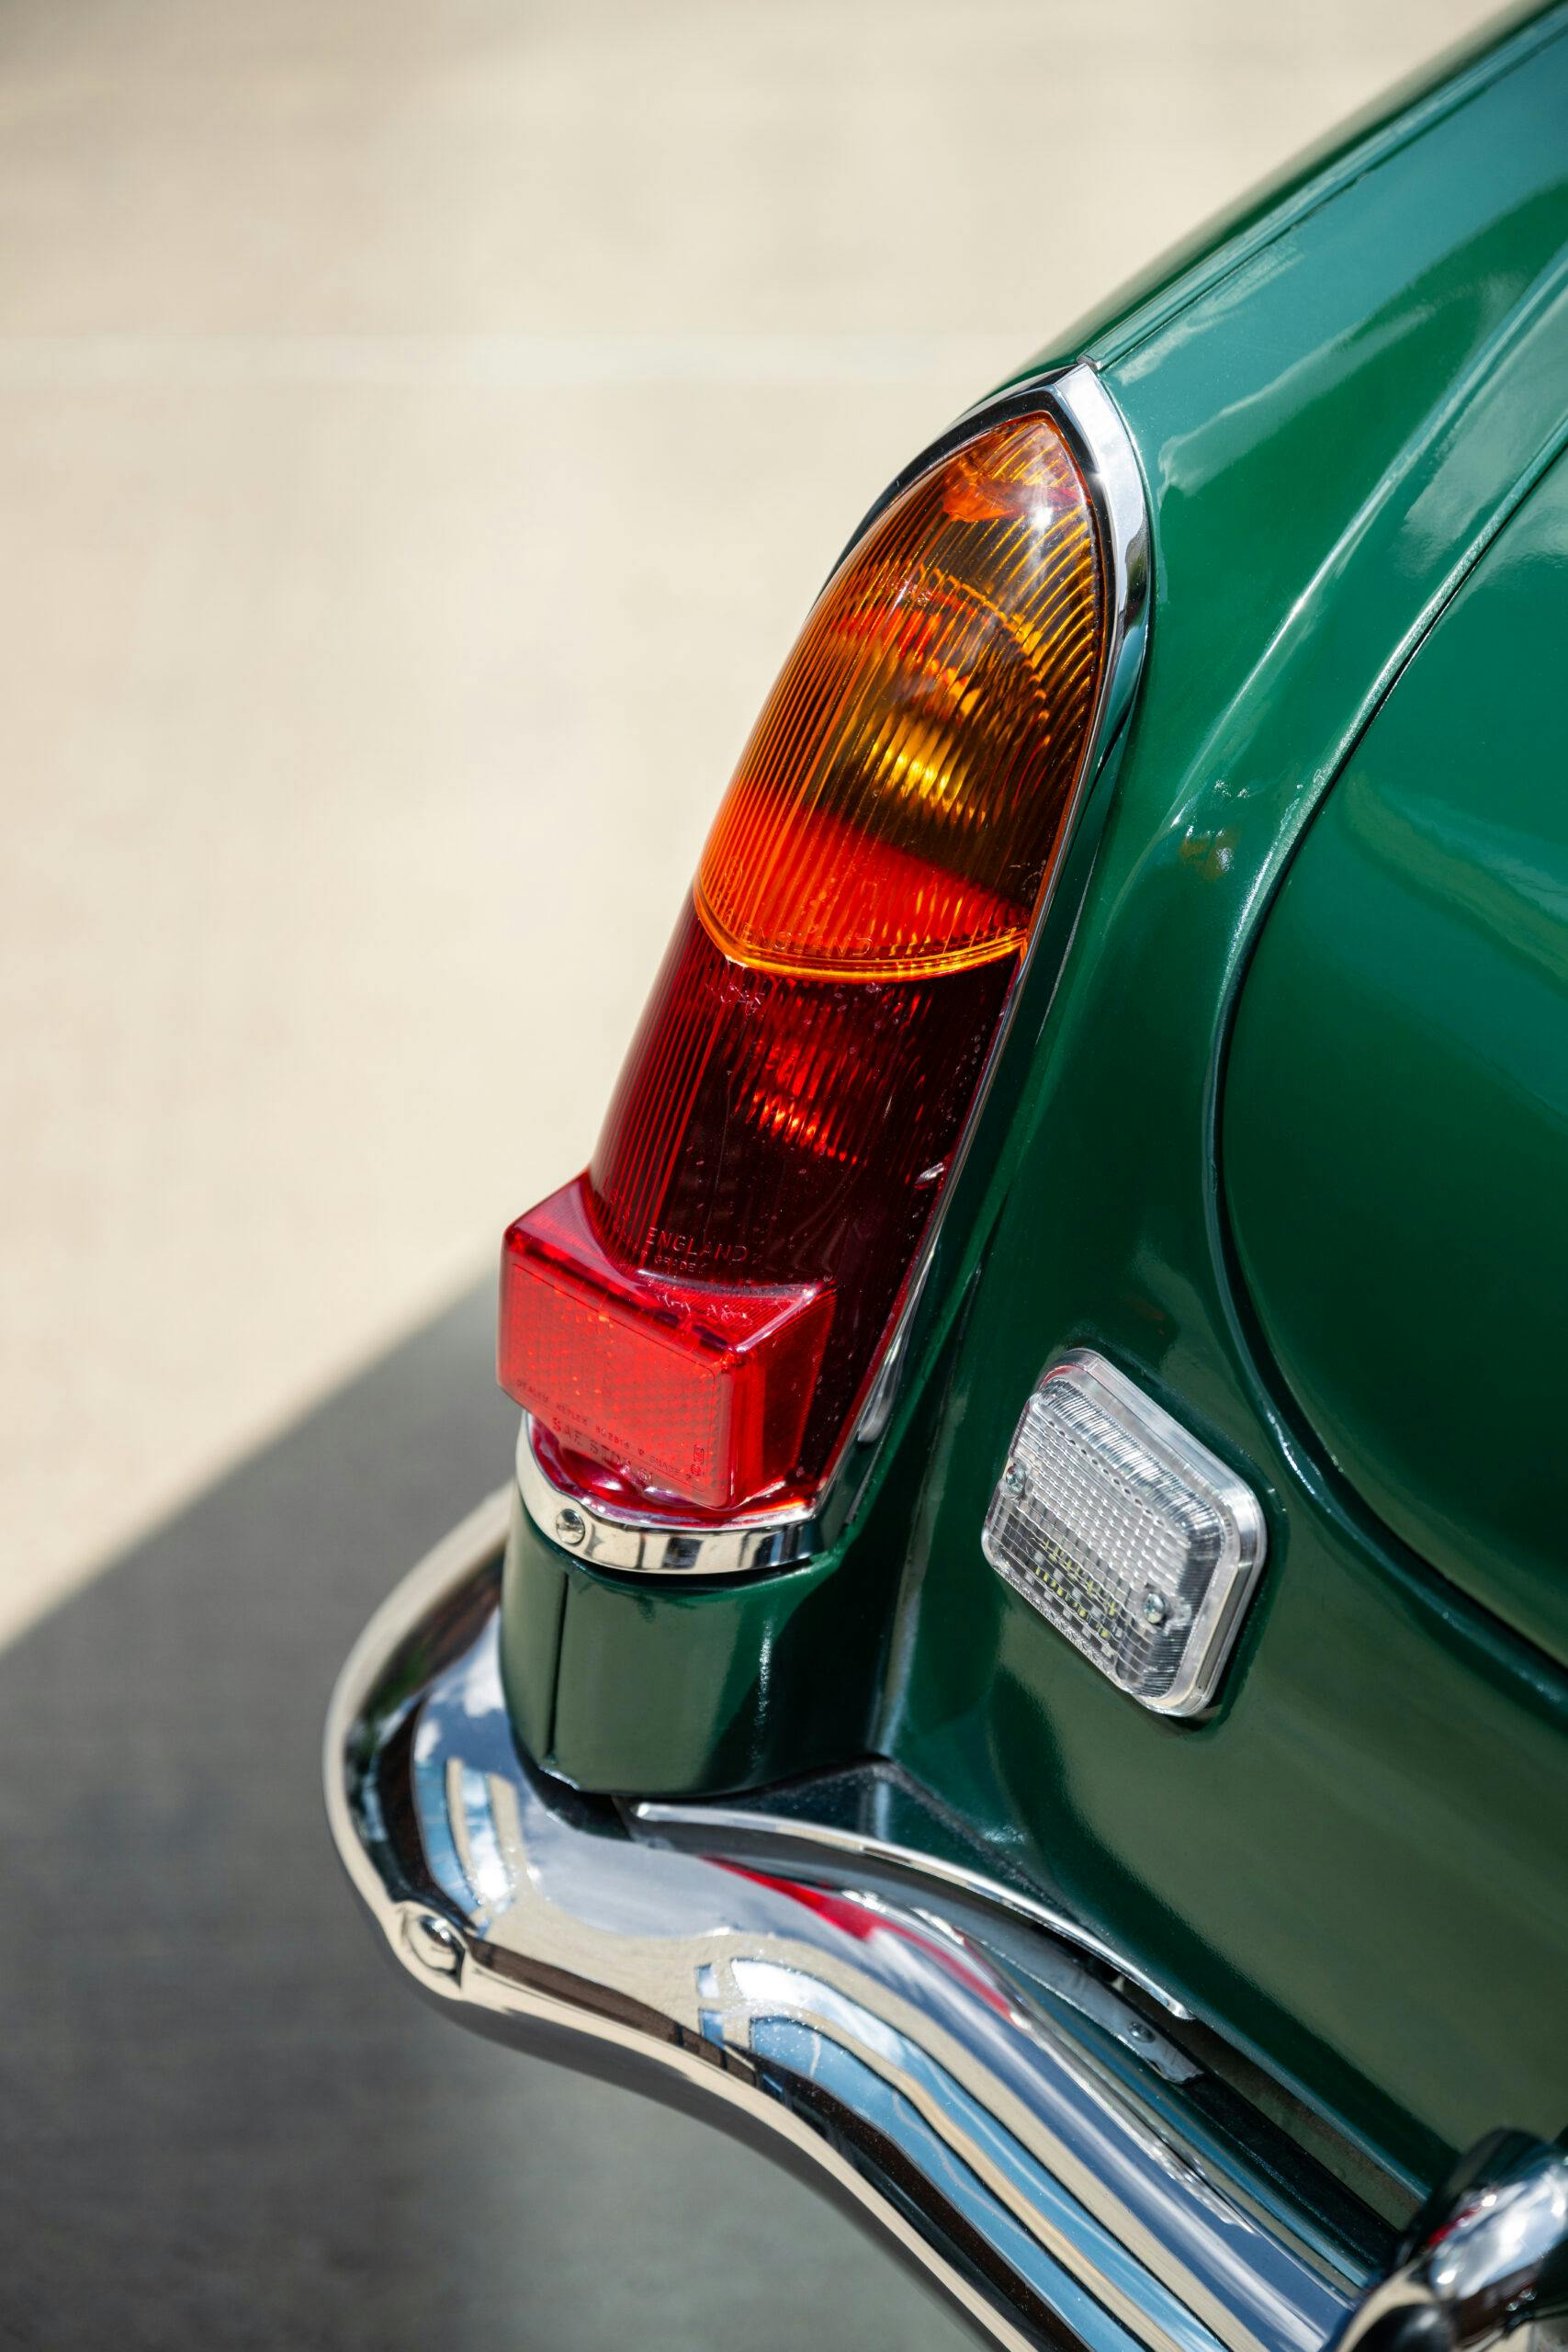 1970 MG MGB rear taillight vertical